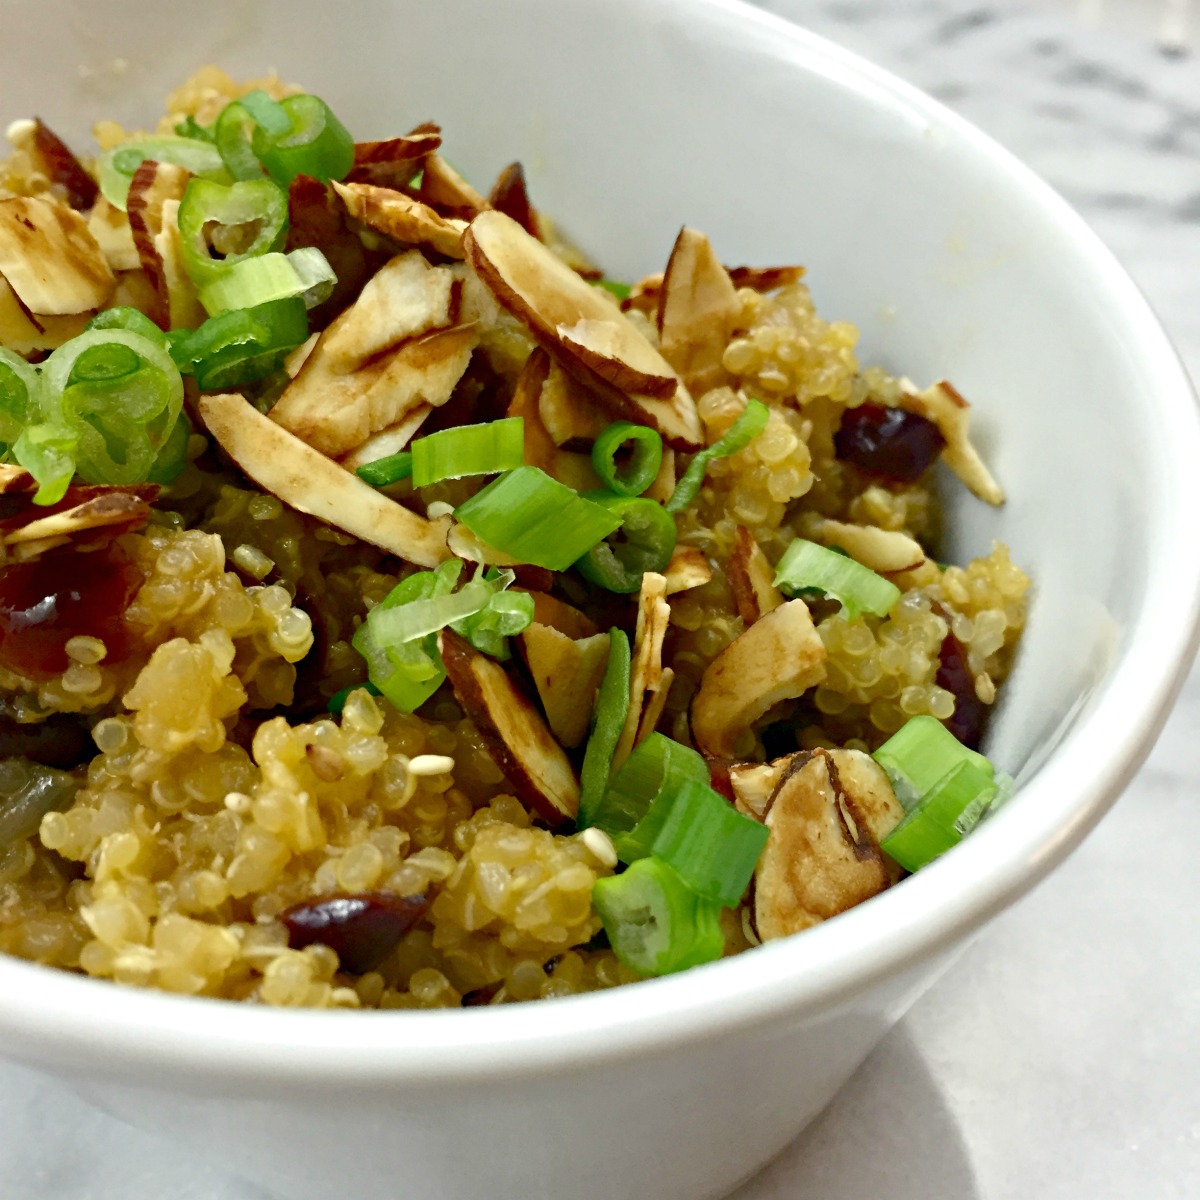 savory quinoa with toasted almonds and dried cranberries :: by radish*rose